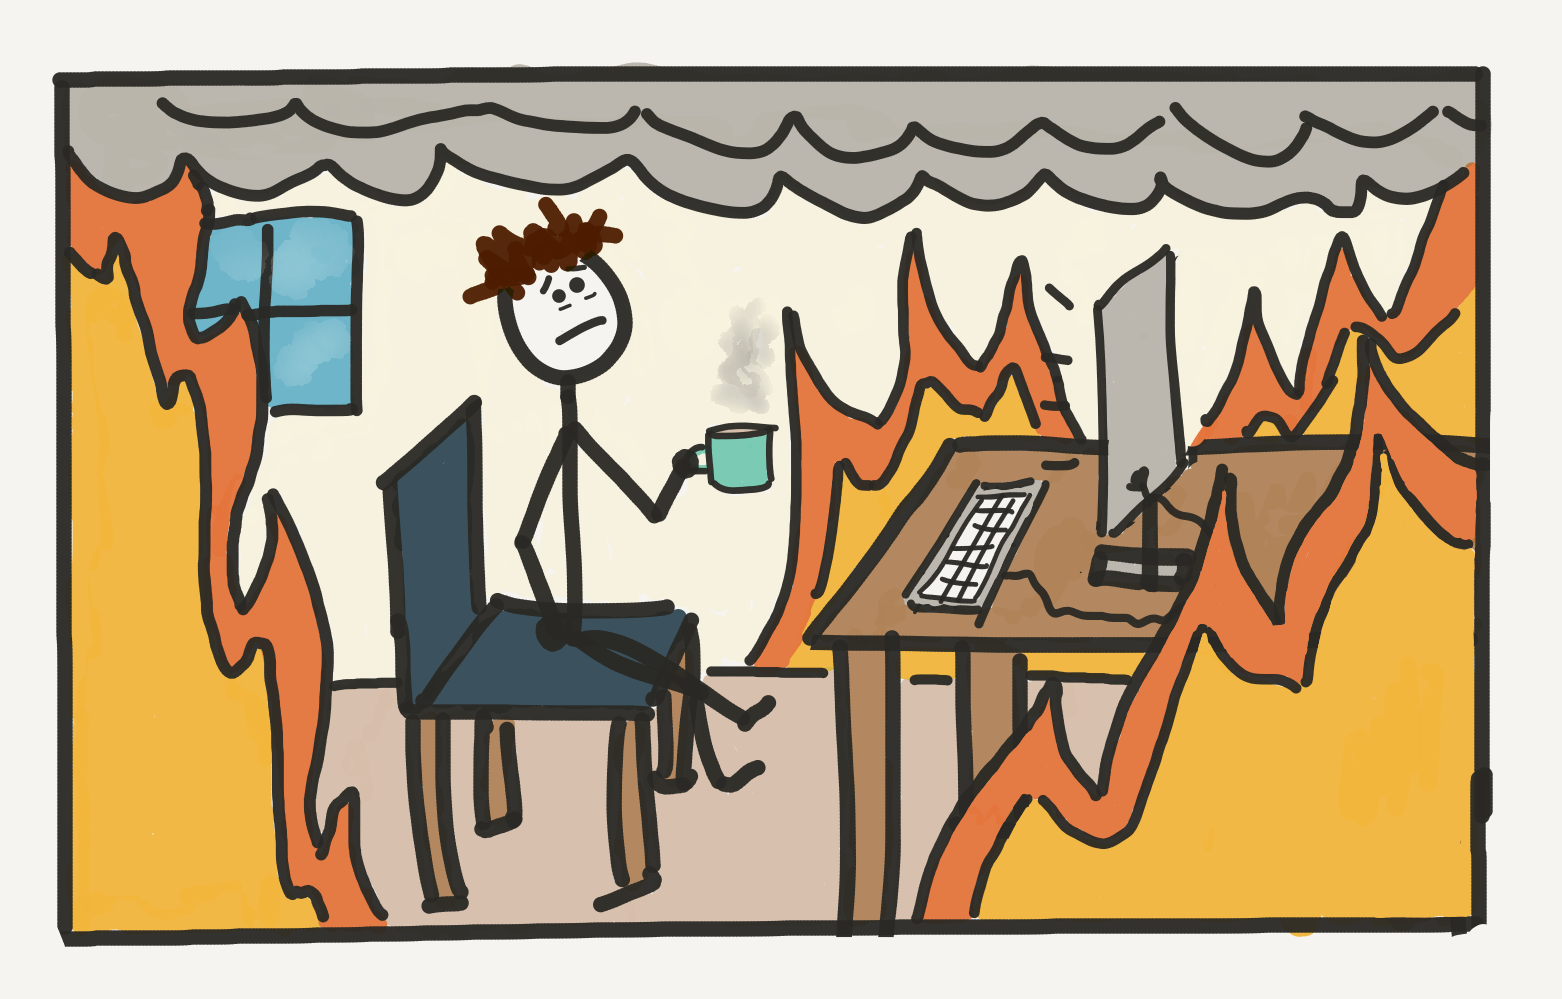 Trying to do work in a room that's on fire